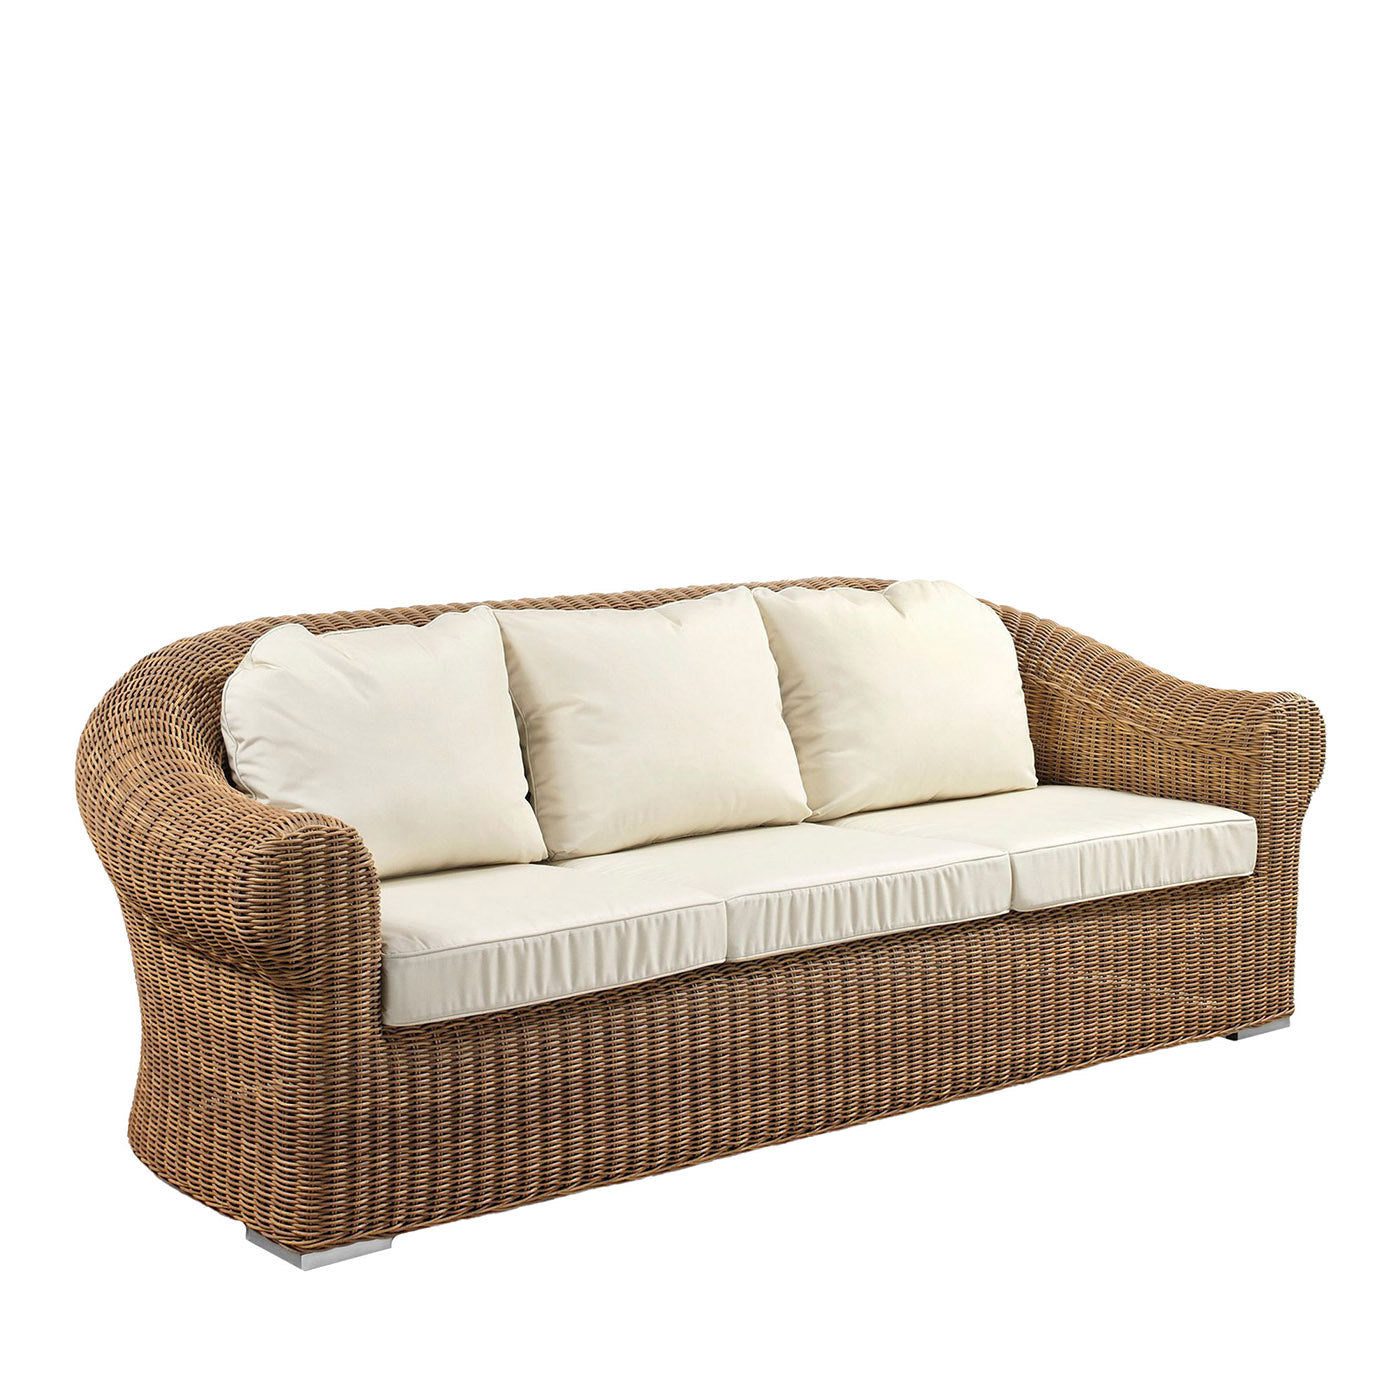 Cloe Synthetic Wicker Textile 3-Seater Sofa by Braid Design Lab - Main view